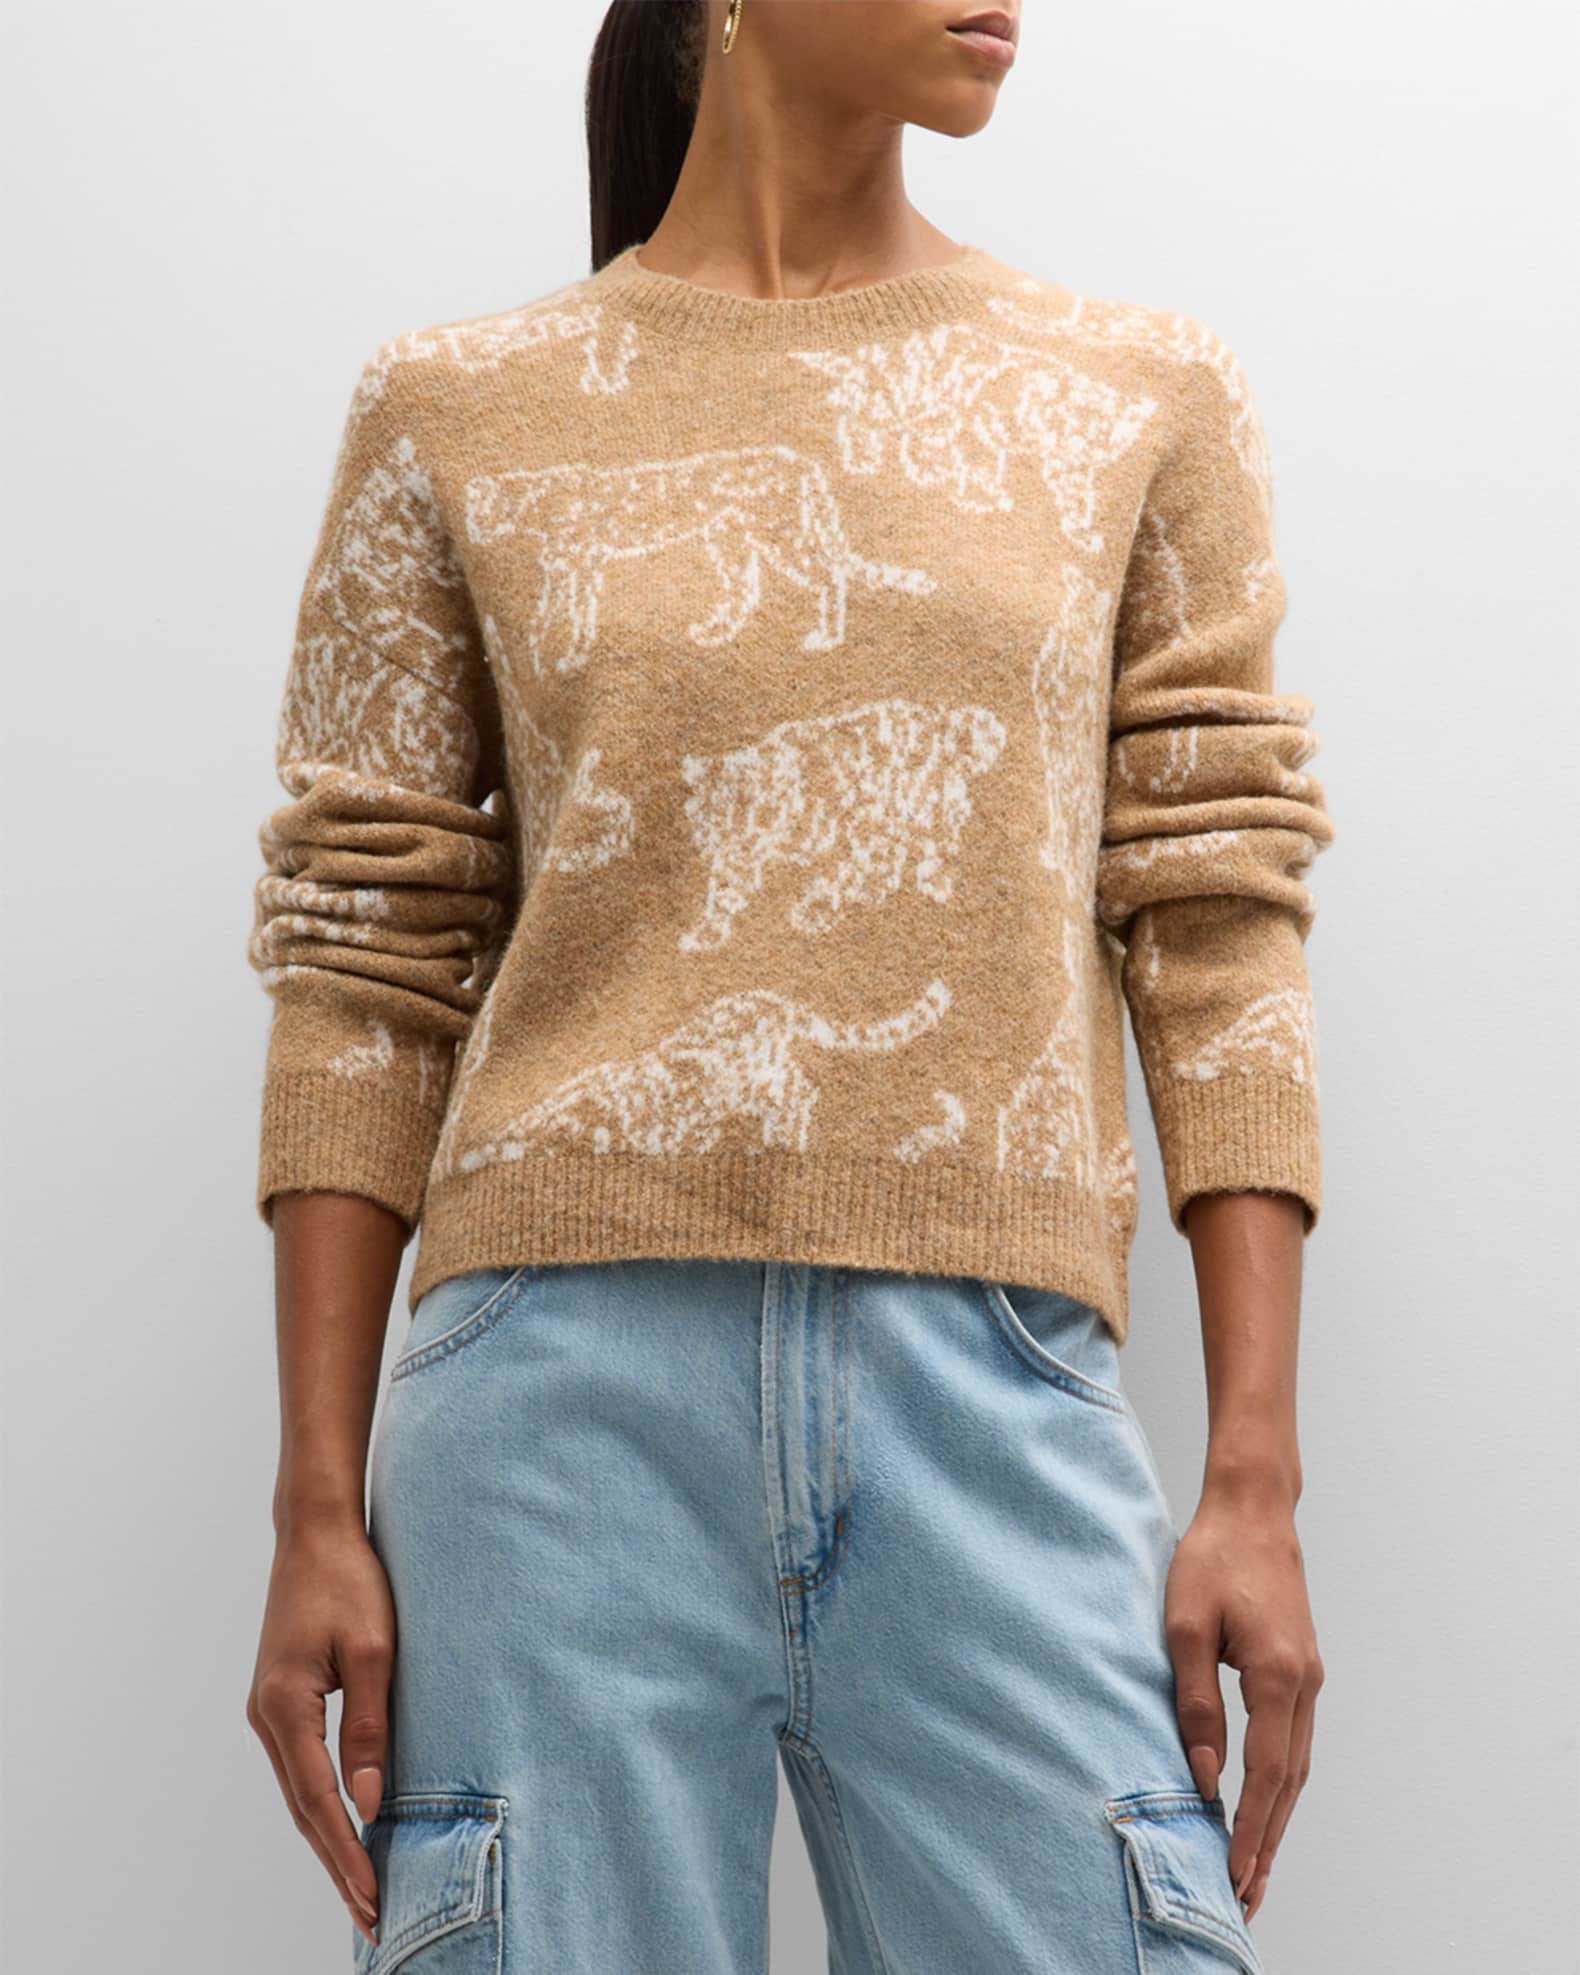 Louis Vuitton 2022 Tiger Intarsia Pullover - Sweaters, Clothing